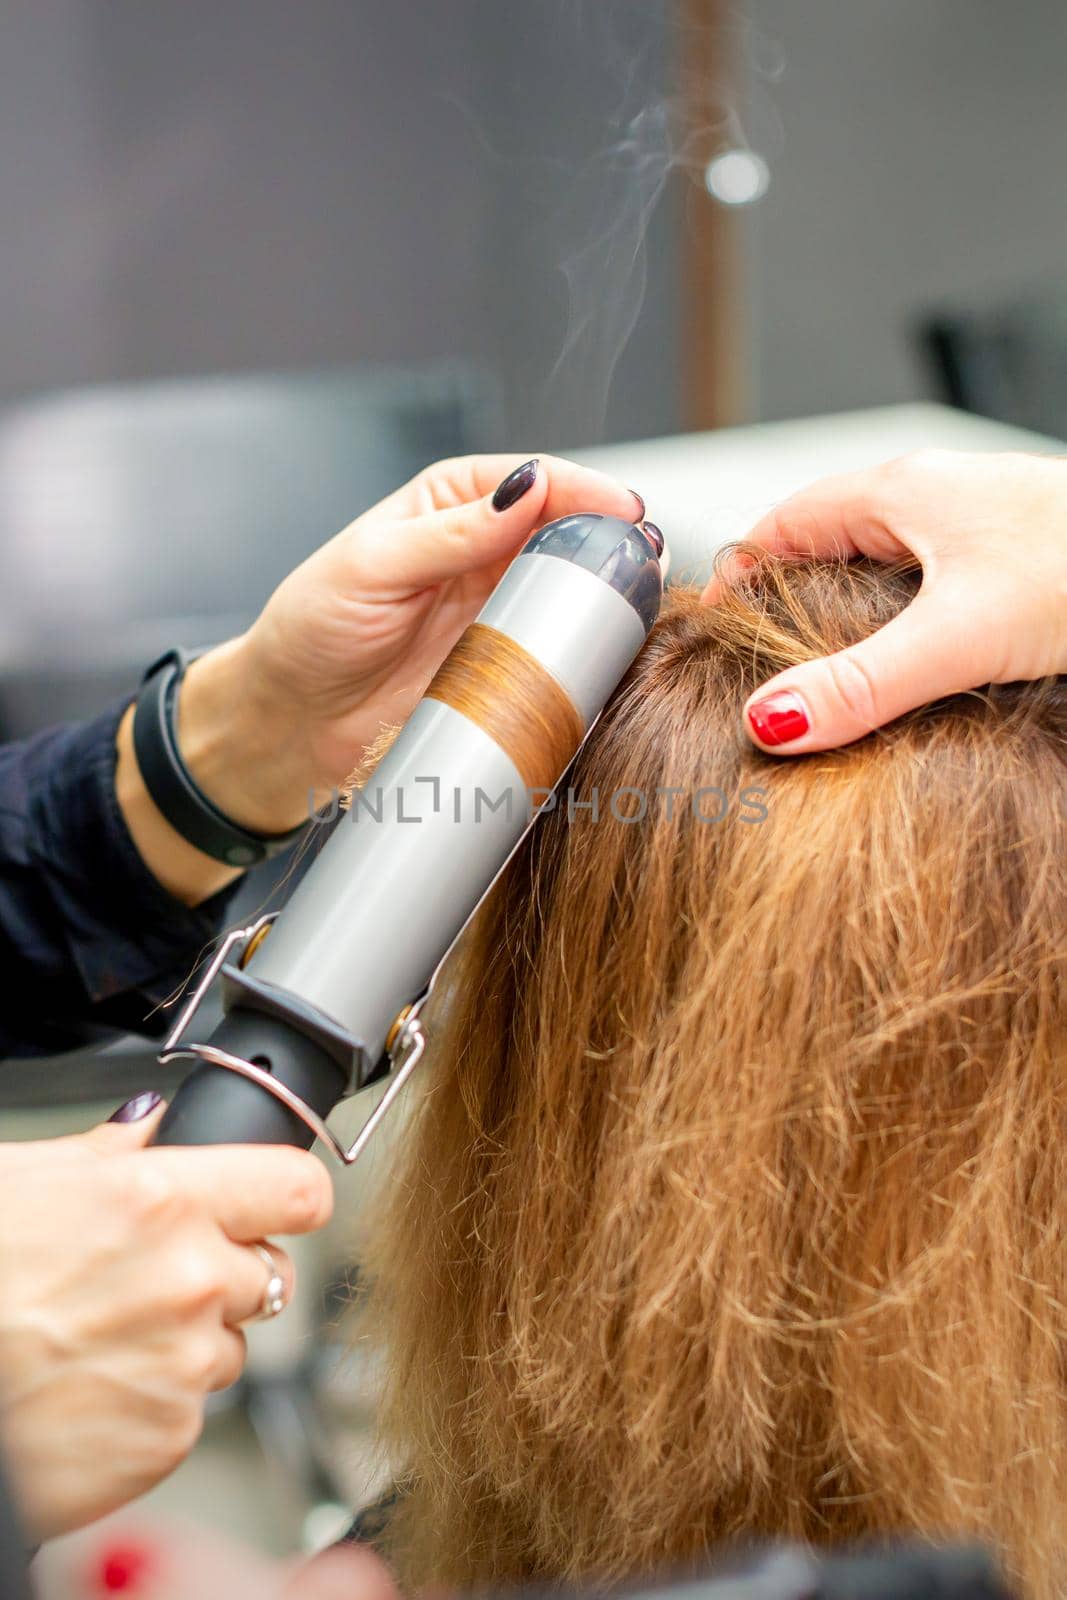 Hands of female hairstylist curls hair client with a curling iron in a hairdressing salon, close up. by okskukuruza